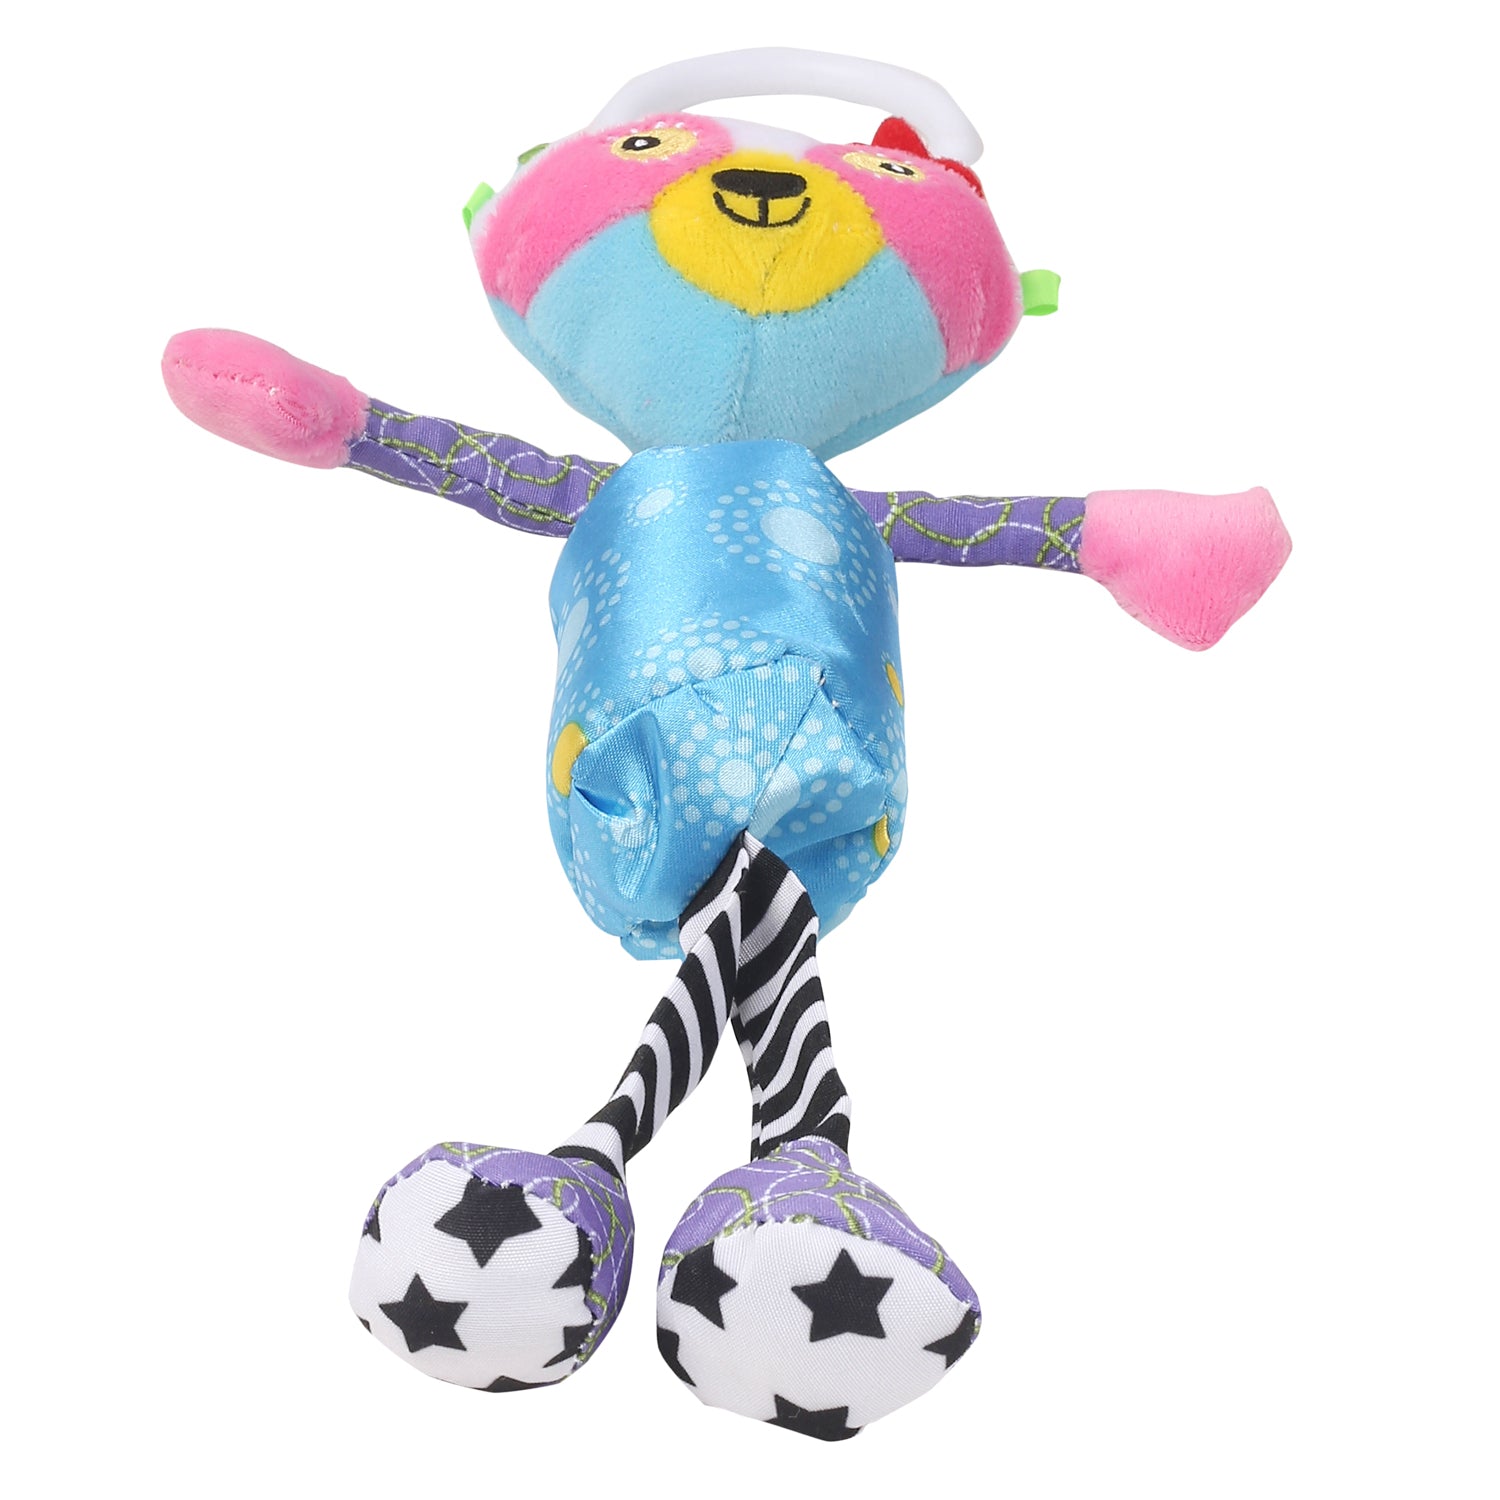 My Best Friend Pink And Blue Hanging Musical Toy / Wind Chime Soft Rattle